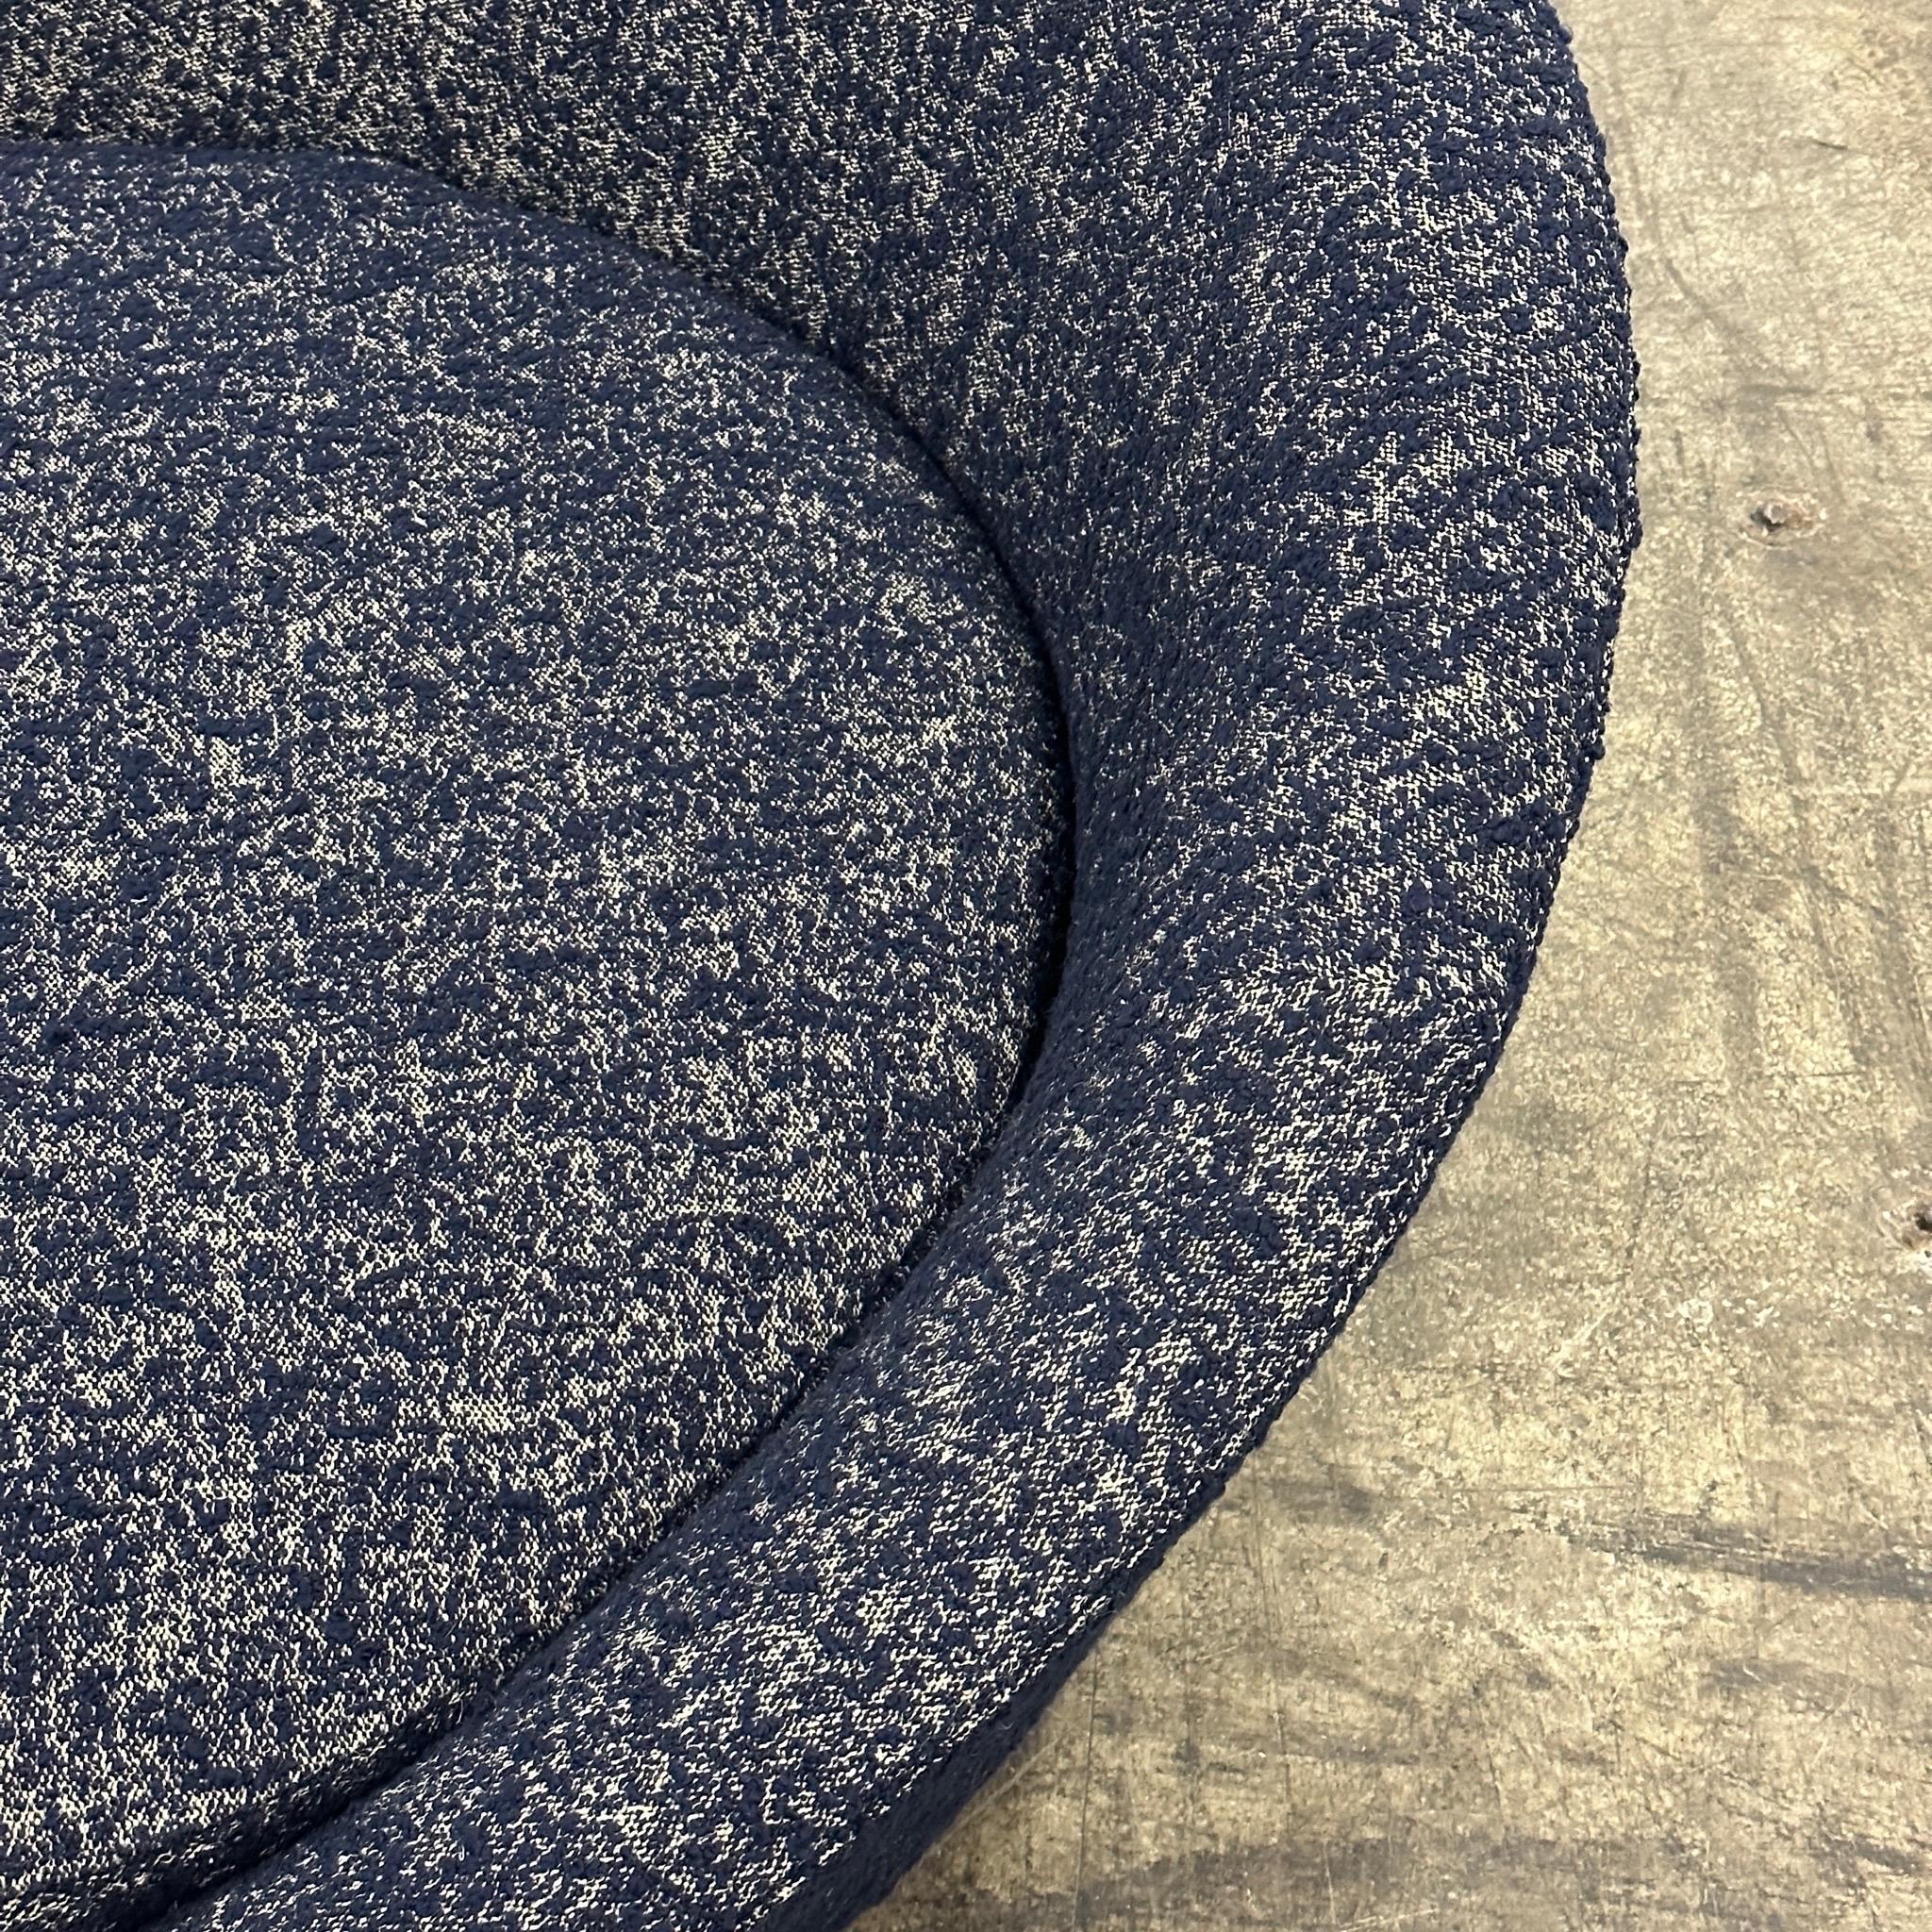 c. 1970s. Reupholstered in nubby navy boucle on top and navy vinyl on the base. New foam added for extra comfort. 